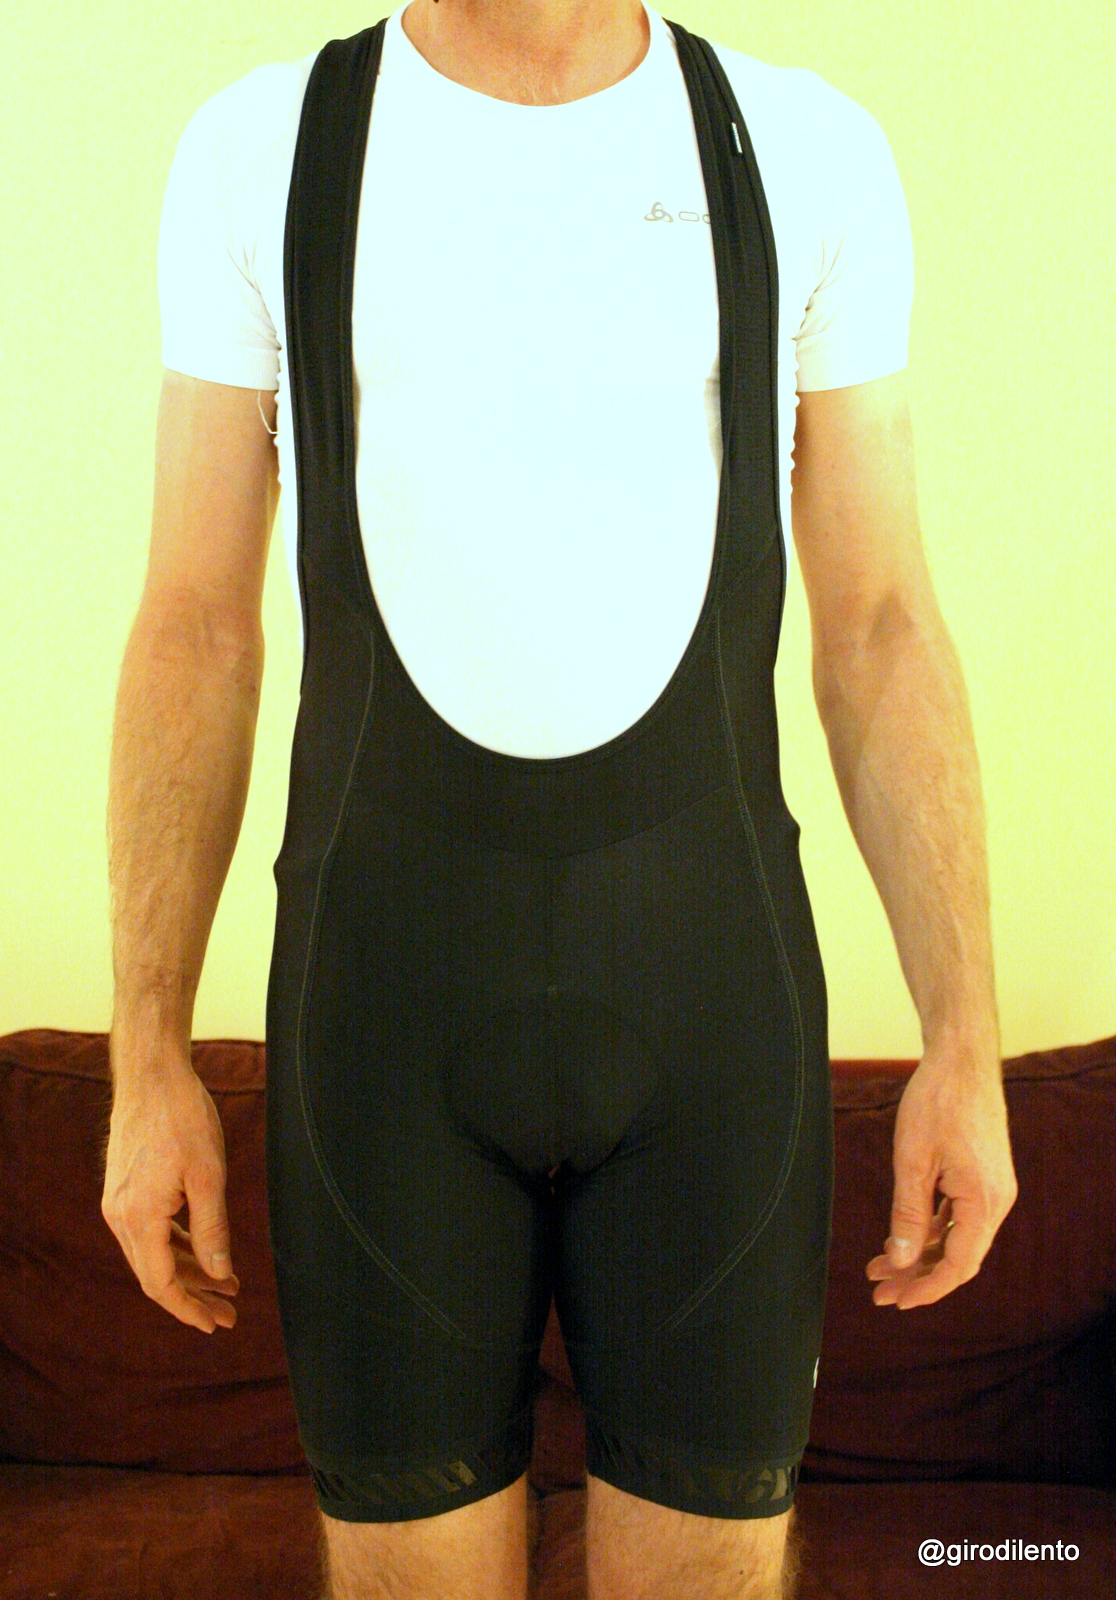 Bontrager Race Thermal Bib Shorts from the front